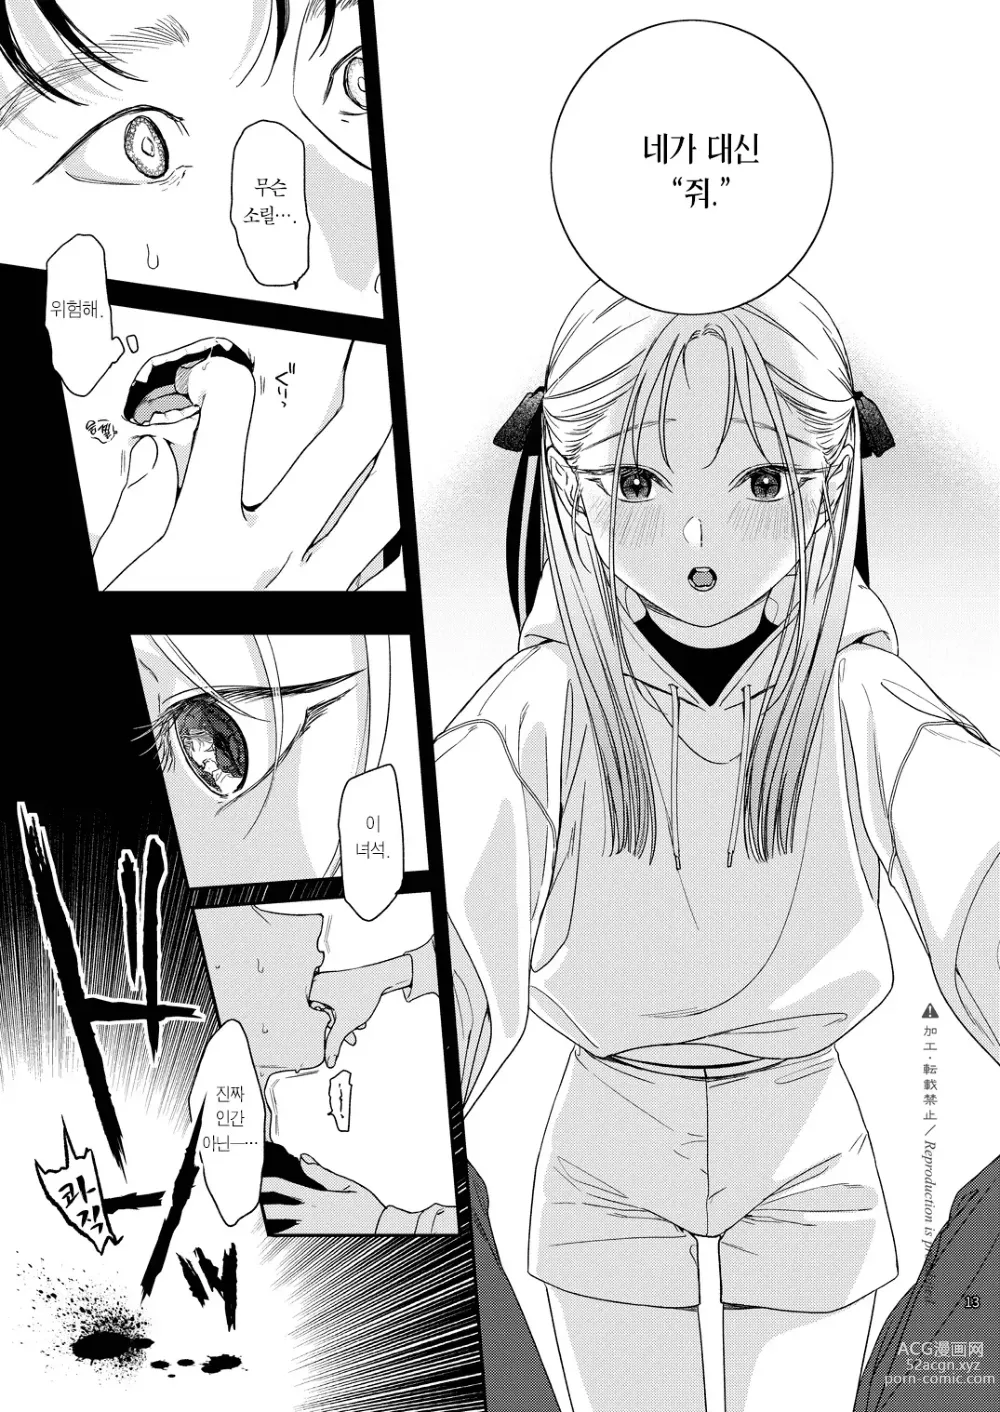 Page 14 of doujinshi 카타미와 월맹